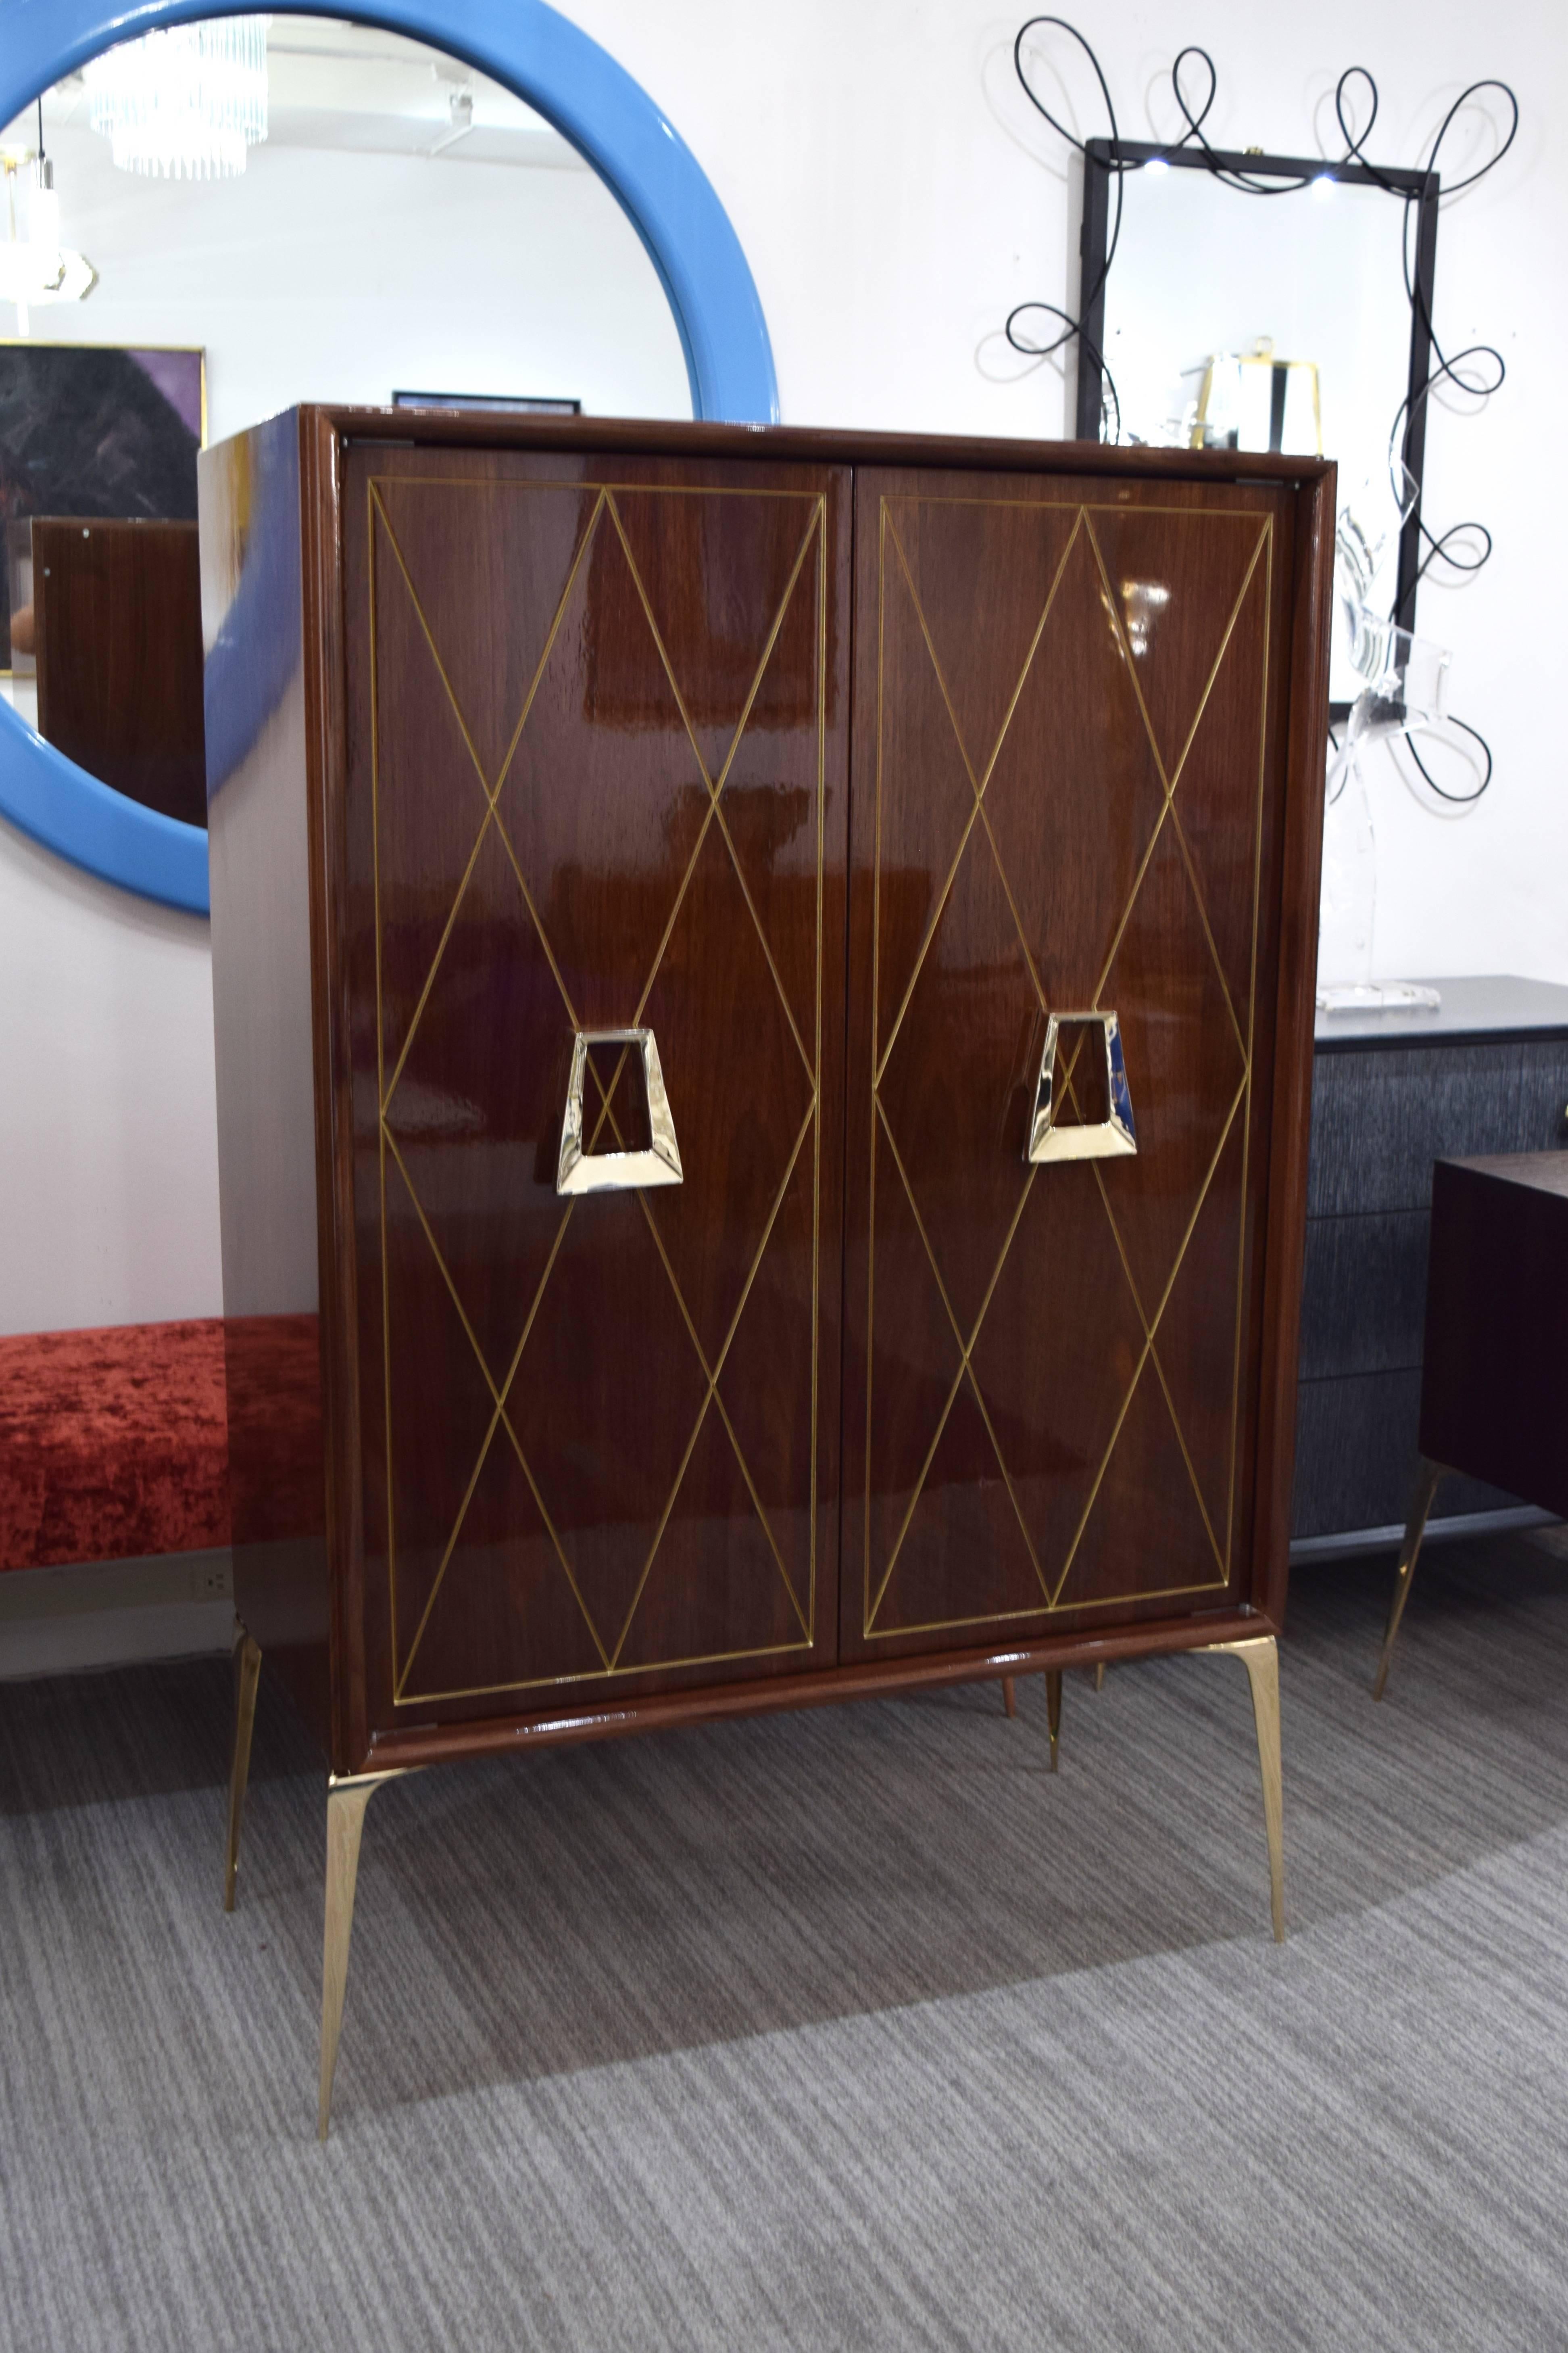 Superb incised diamond front bar cabinet by Irwin Feld Design for CF modern. Fabricated in the USA of walnut (as shown) customized to your perfect specifications. Shown with a beautiful front geometric golden carving with polished brass knocker